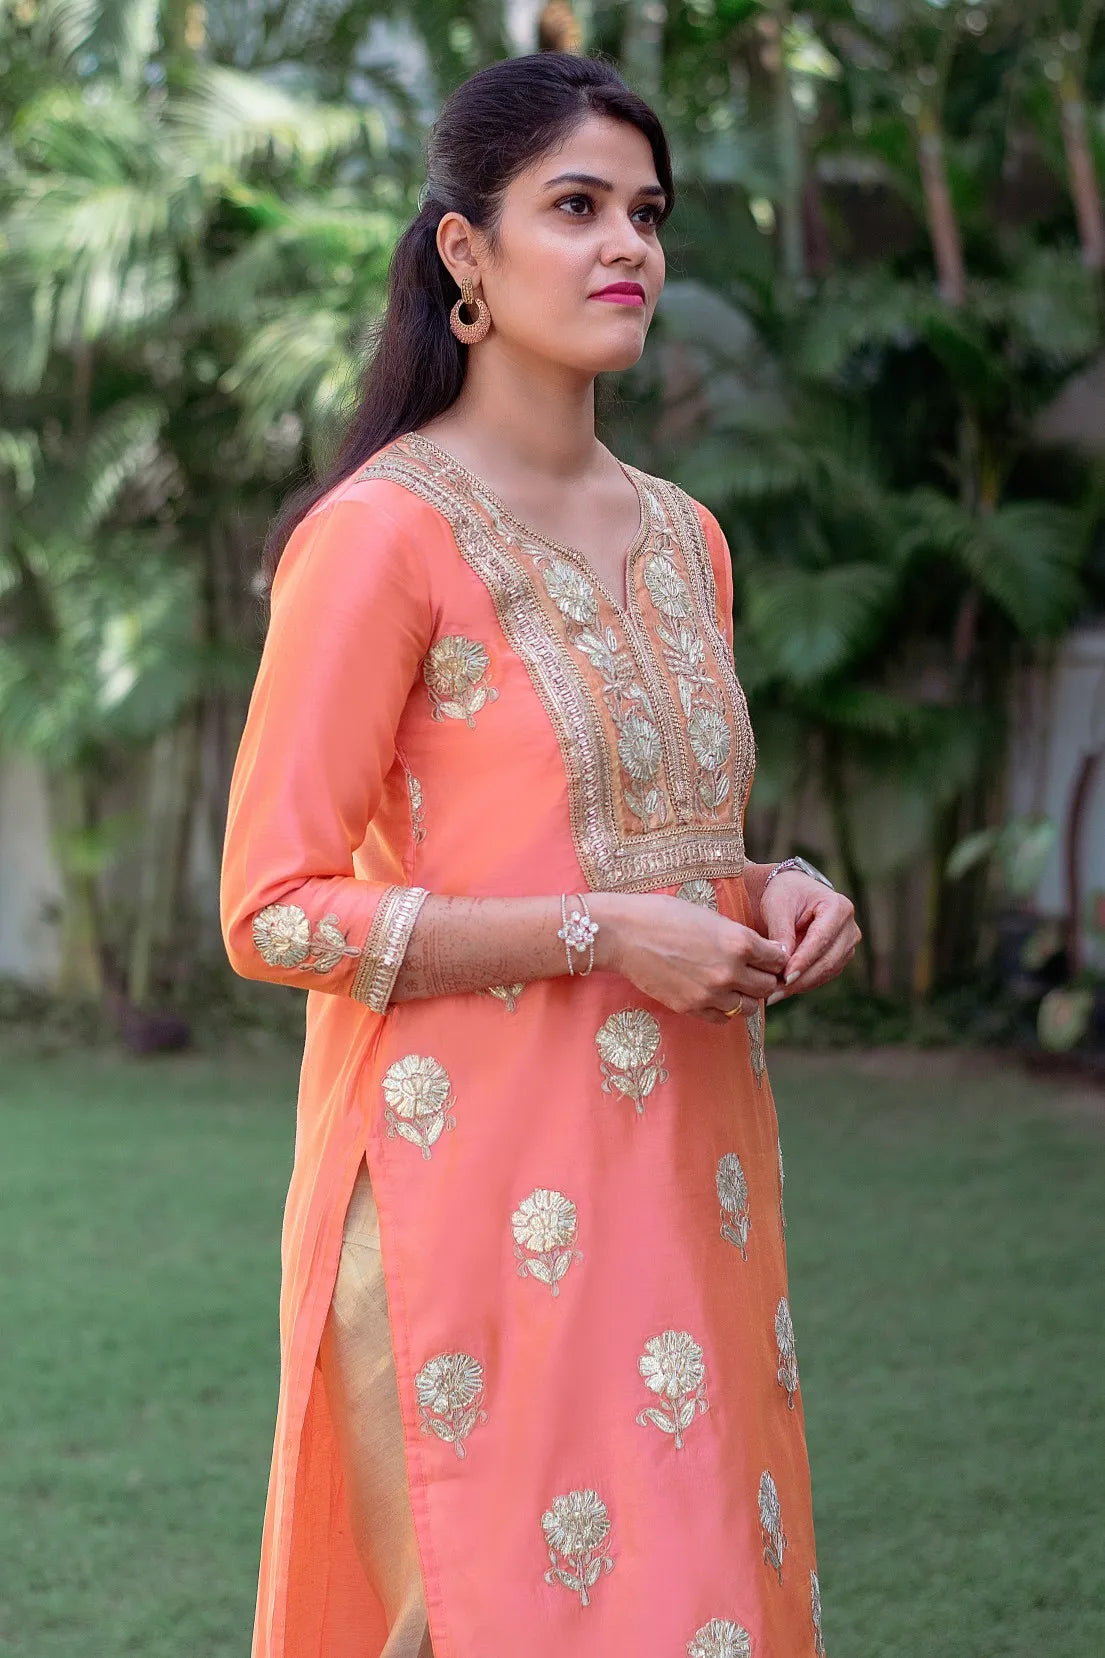 Vibrant Peach Chanderi Kurta and Dupatta with exquisite Gota Work, styled with a Golden Churidar.